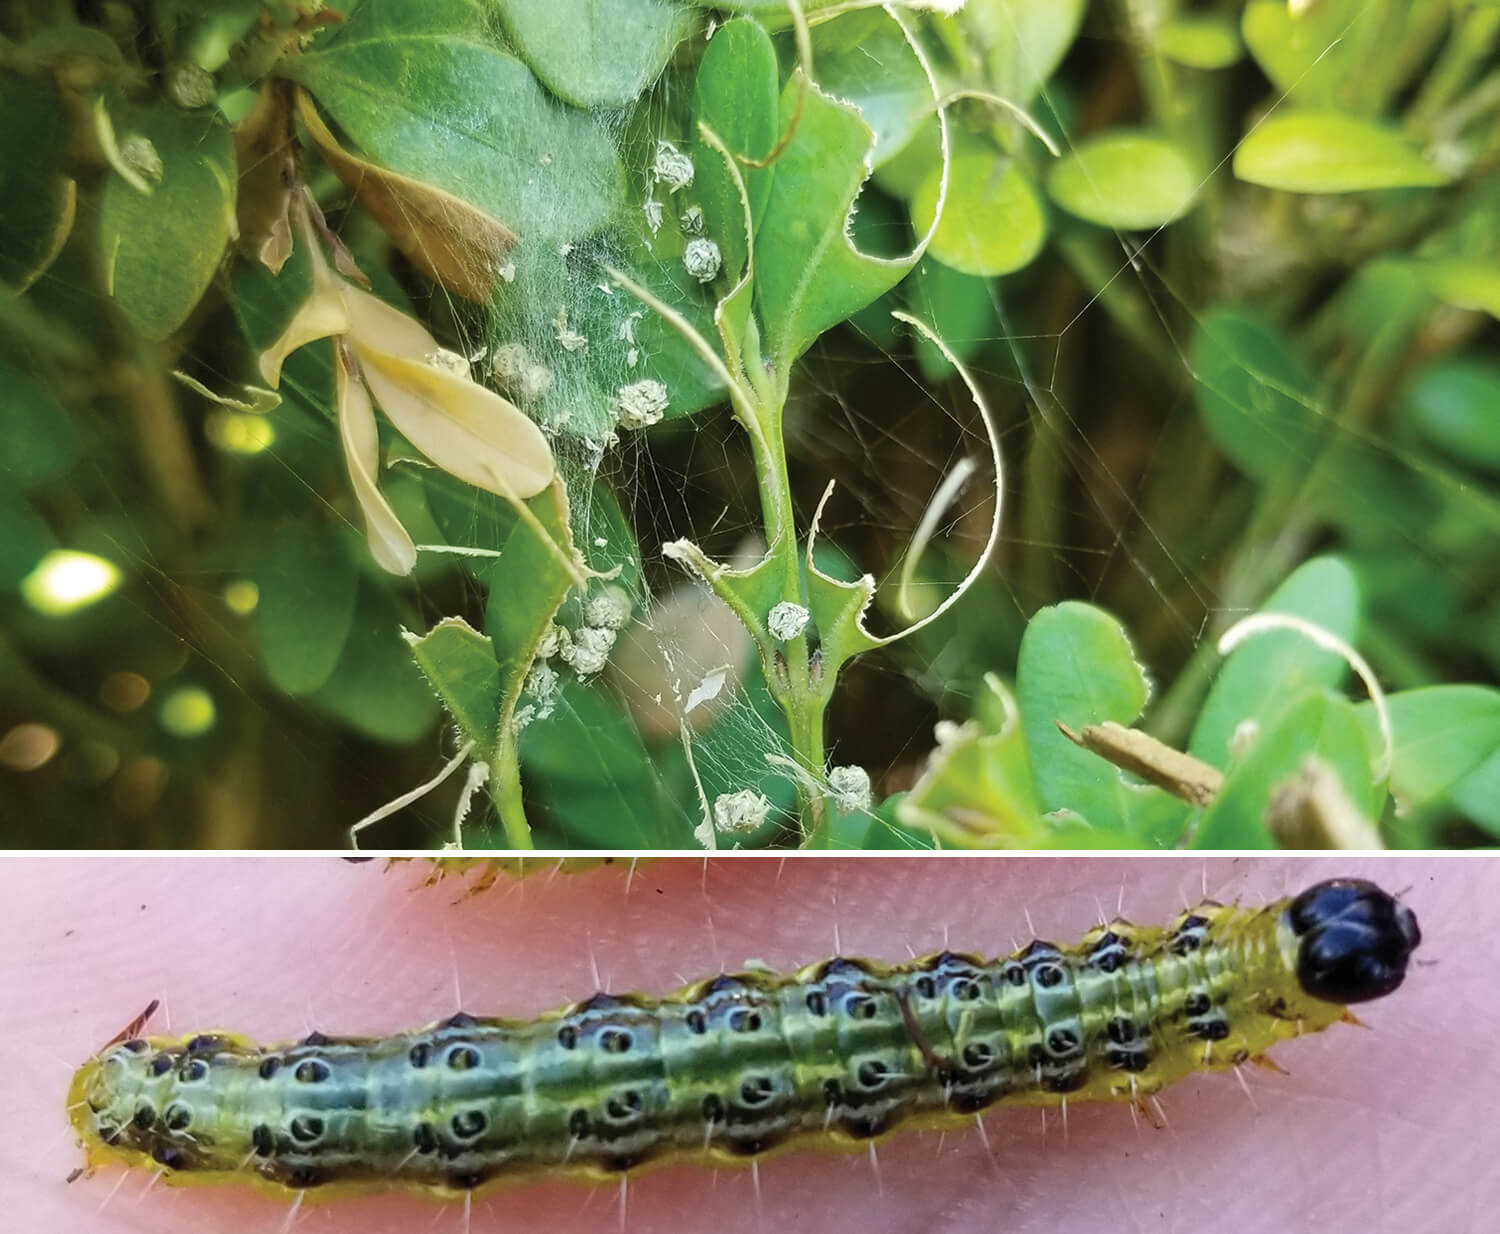 boxwood damage and the larvae that causes it